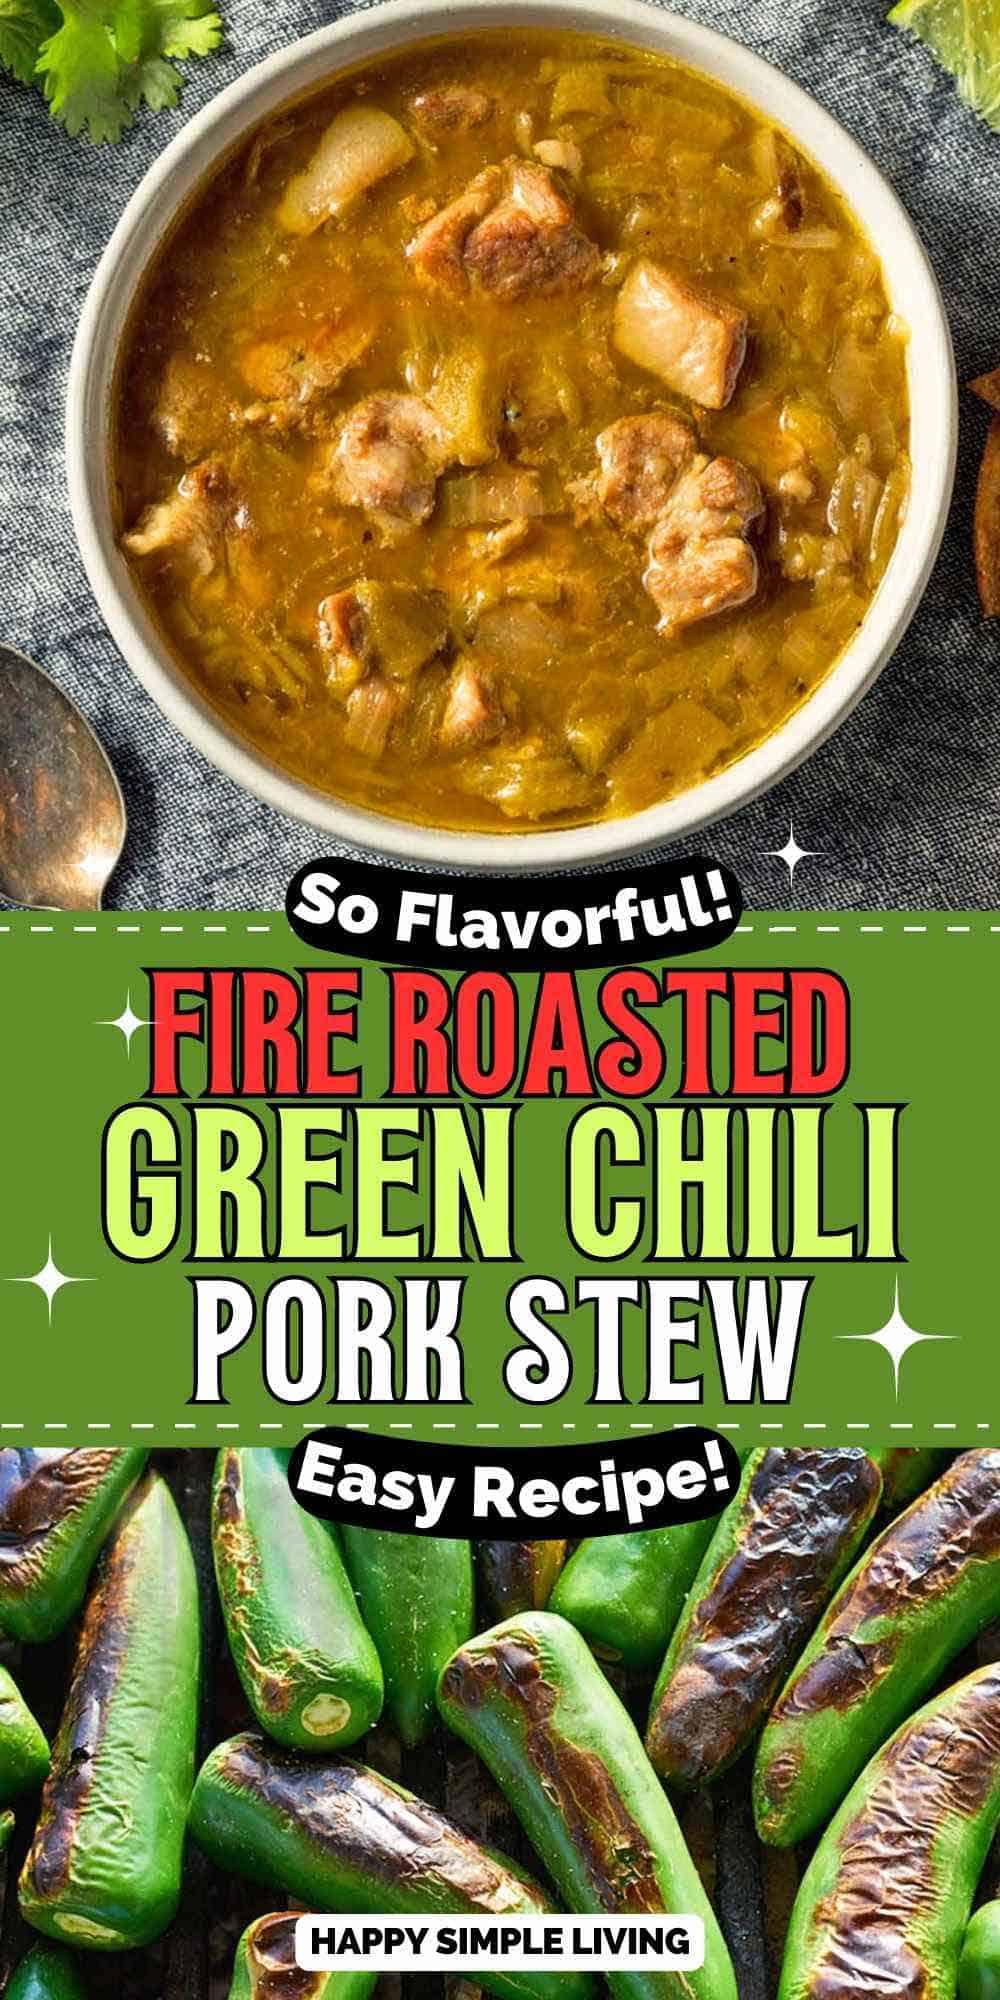 A bowl of green chili pork stew and a pile of fire roasted green chile peppers.